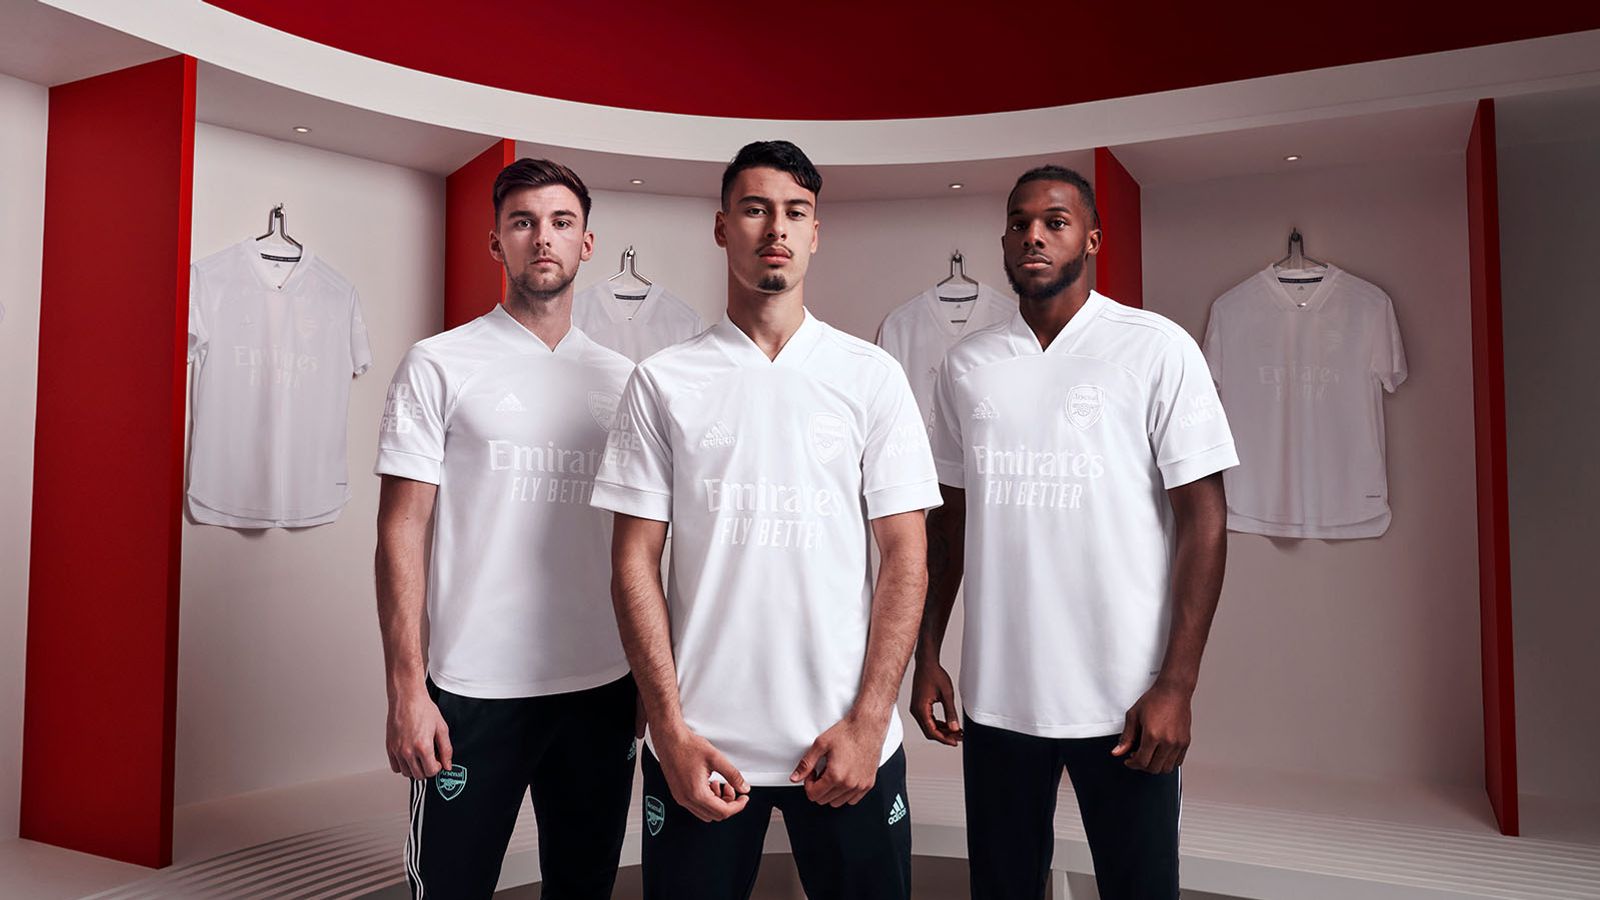 Arsenal removed red from jersey and play in all-white to raise awareness for the rise in knife crime in the UK.